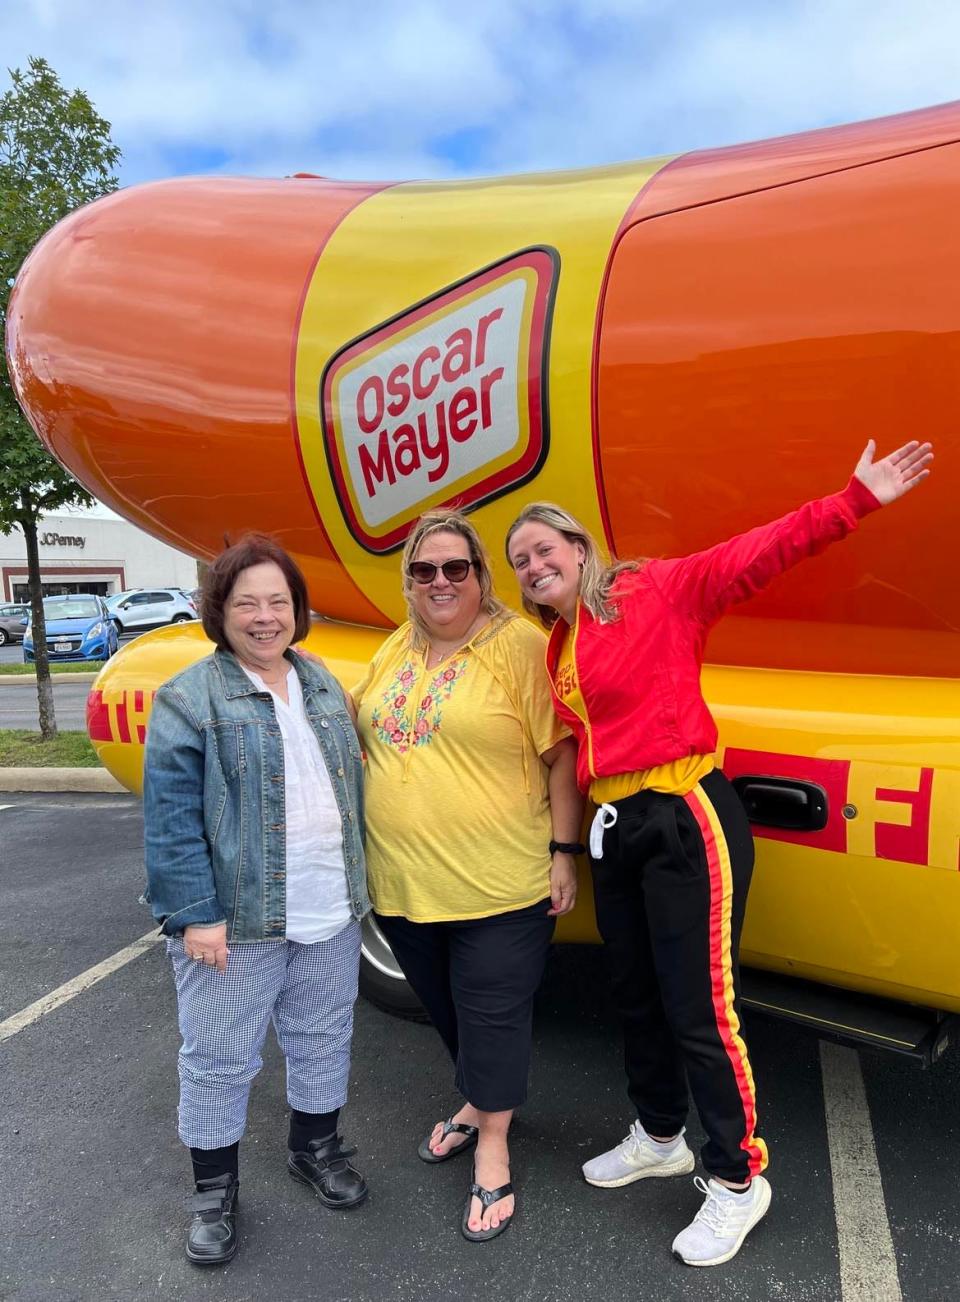 Anna Murphy-Pociask, on the marketing team at Oscar Mayer, is shown with two Youngstown area residents who posed for a photo with the Frankmobile. The unique vehicle will be in downtown Canton today during a Northeast Ohio tour.